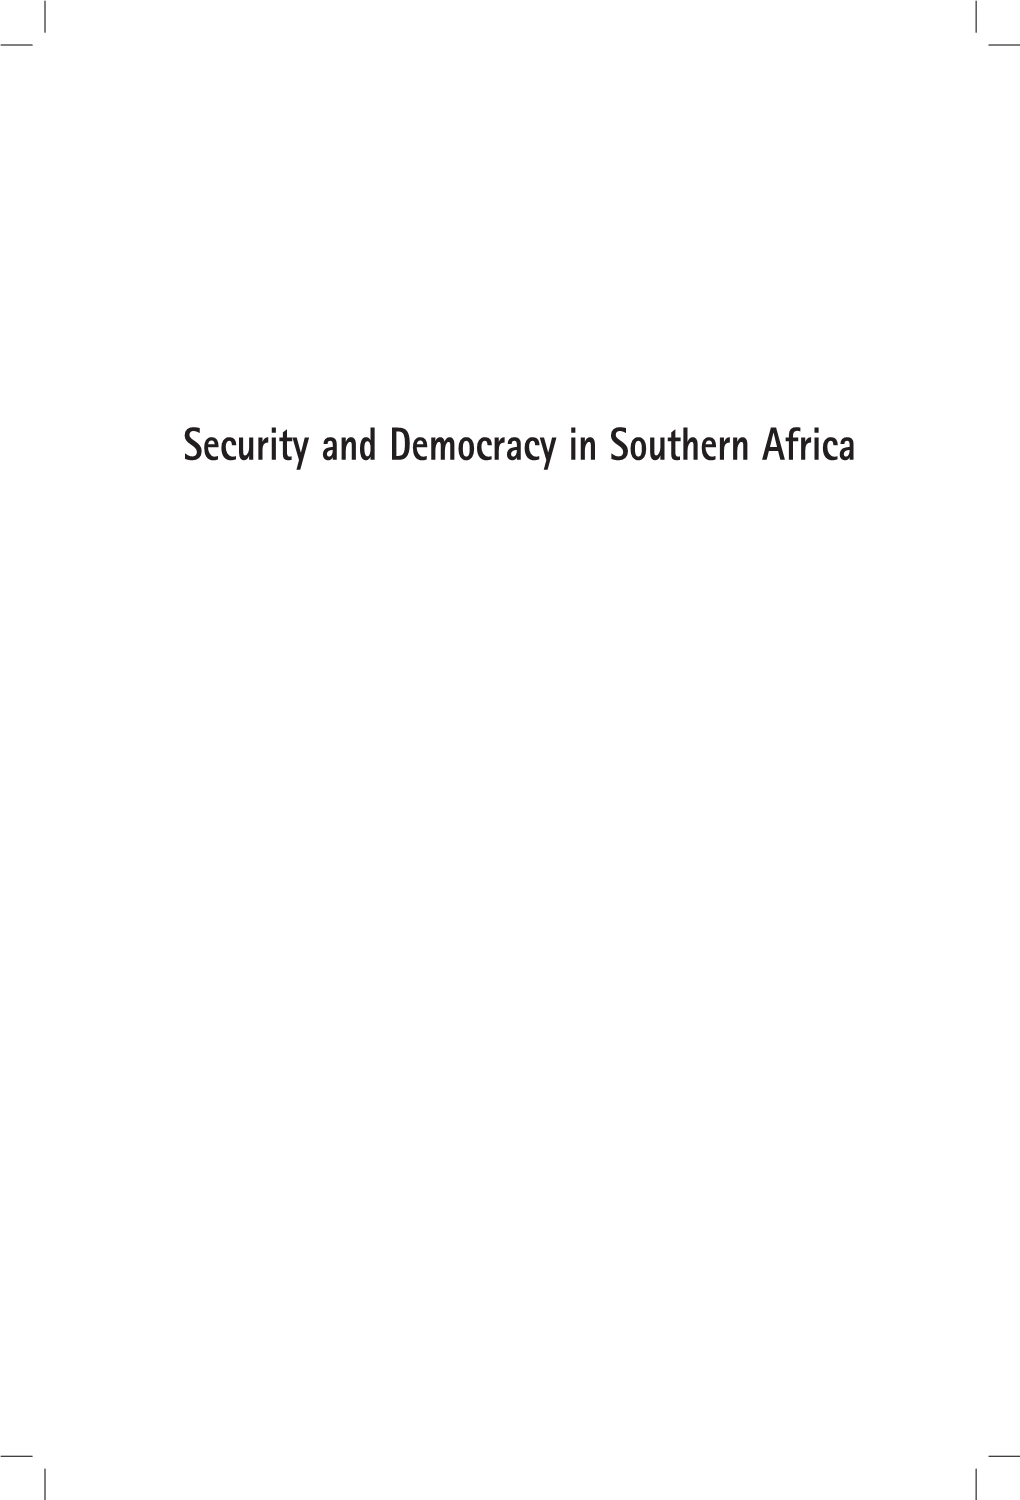 Security and Democracy in Southern Africa • Fourth Positive Proof • 27 August 2007